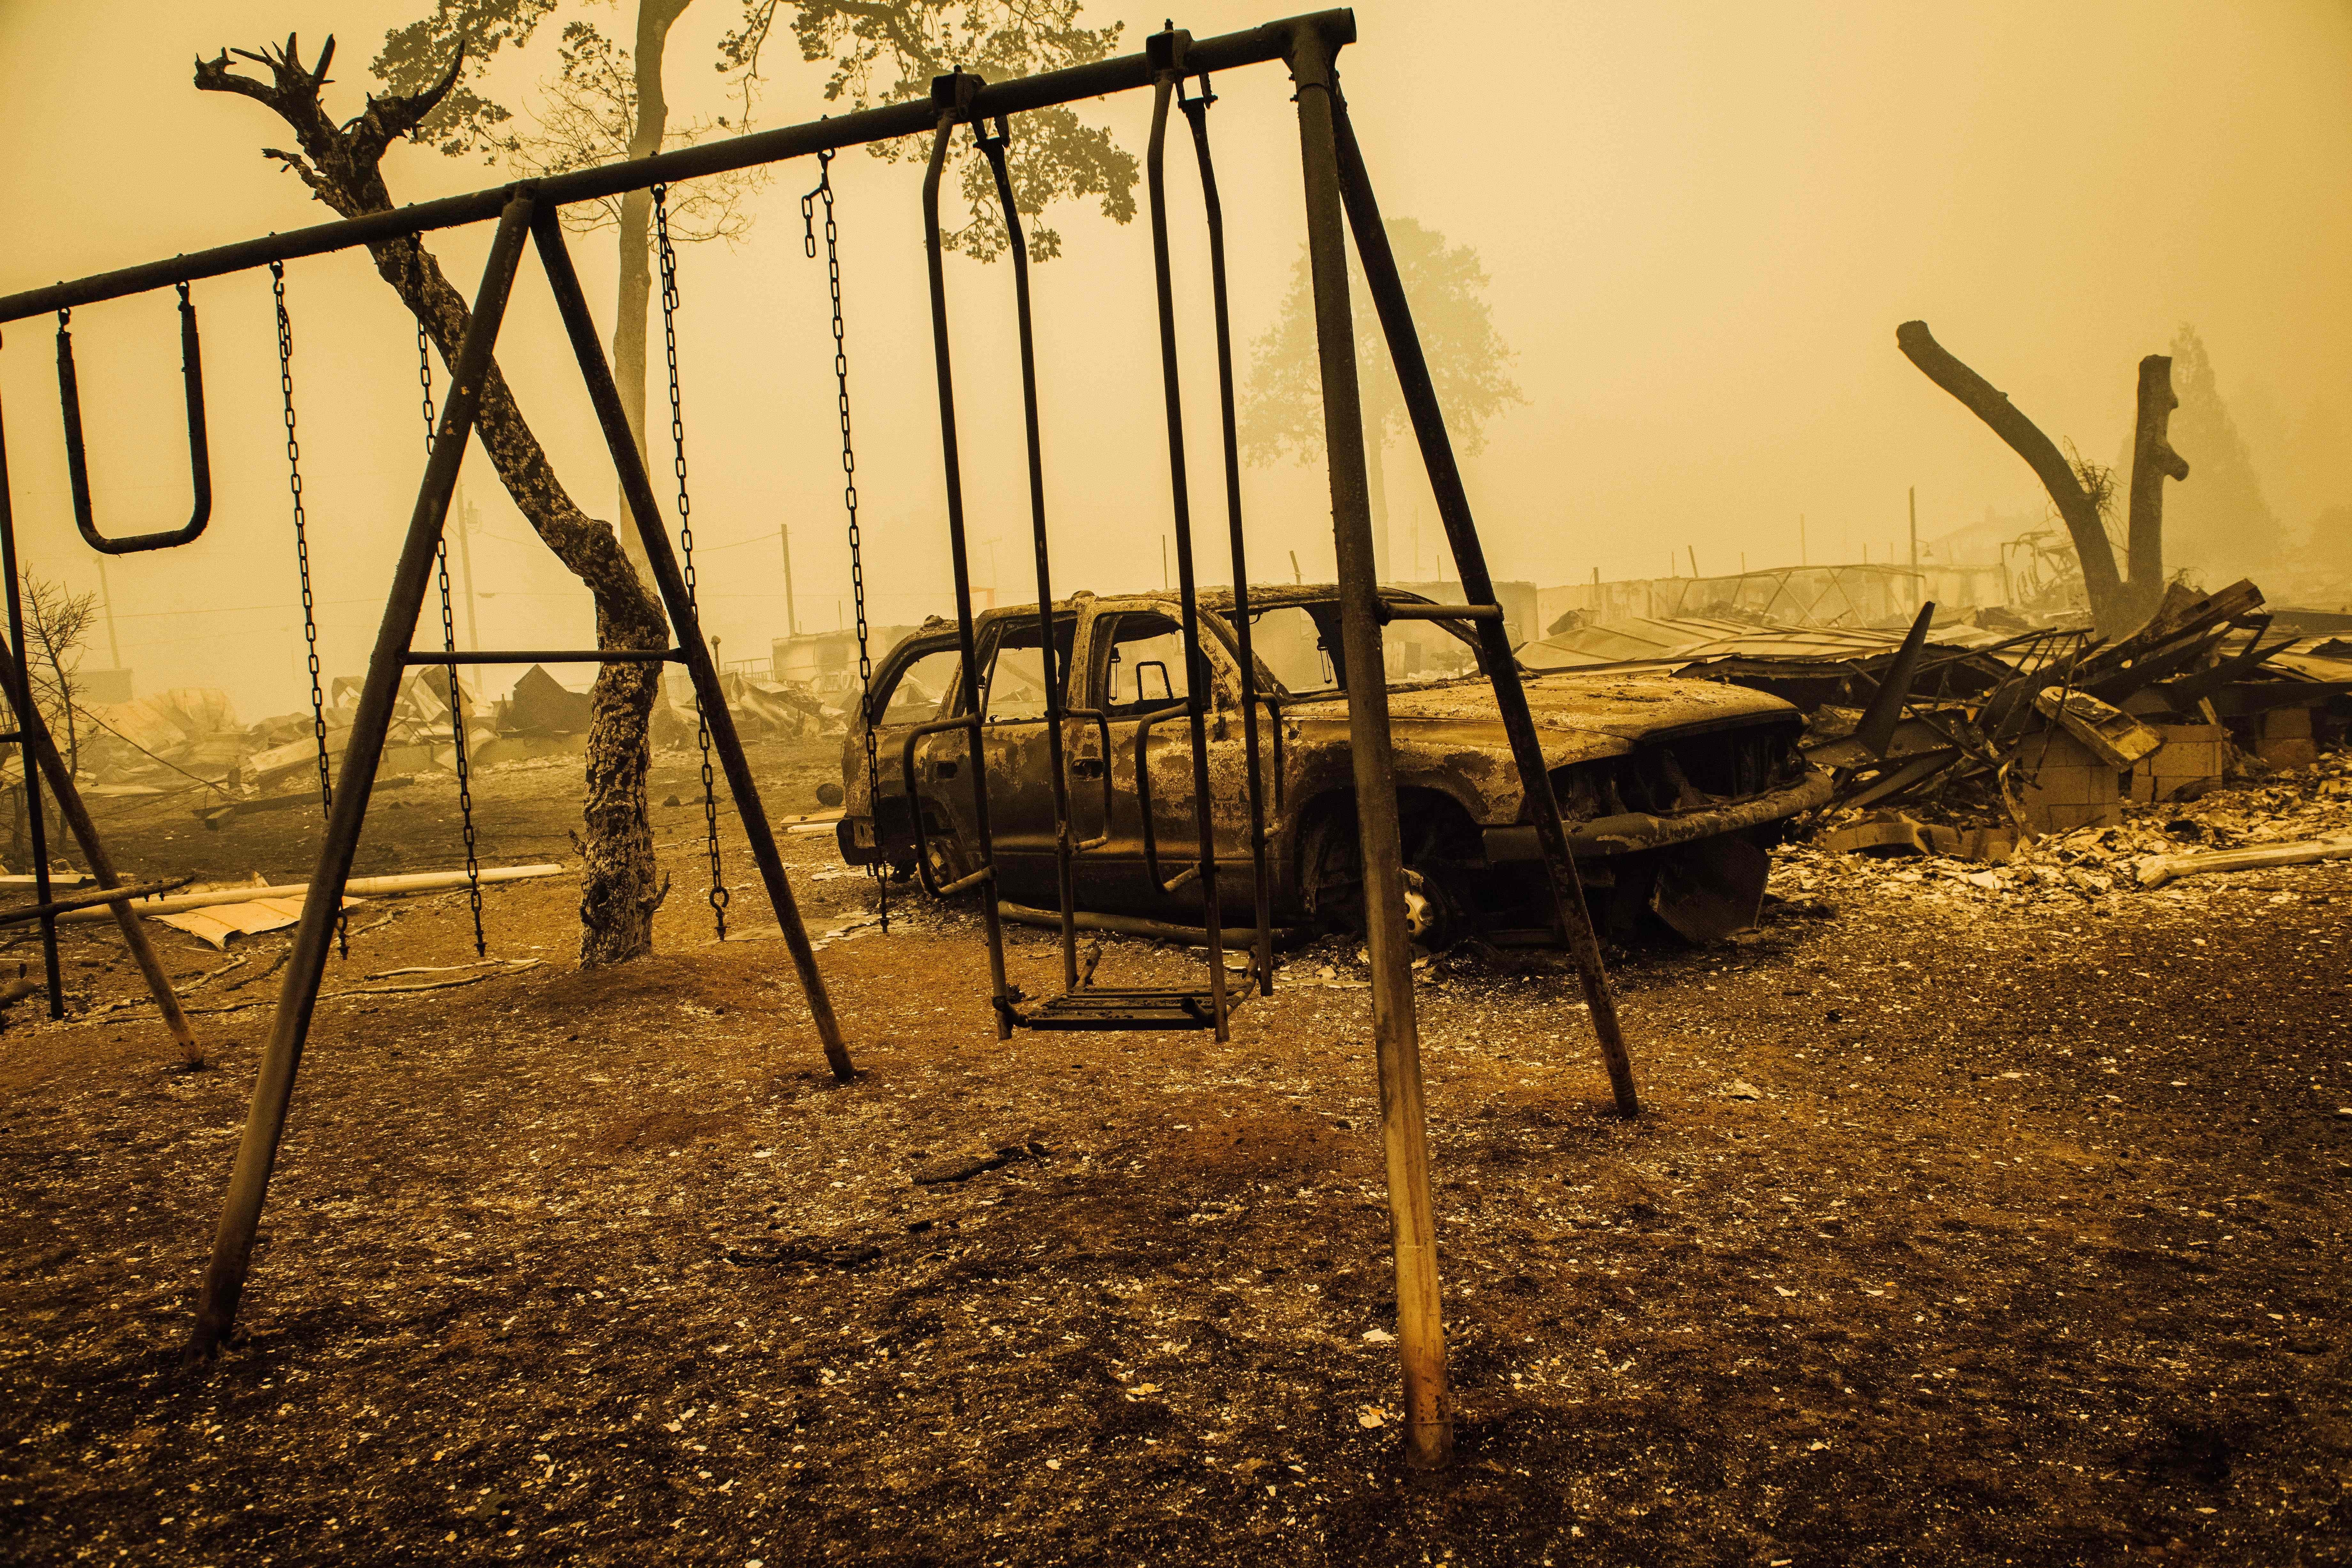 A charred car and swing set in a burned-out landscape yellow with smoke.